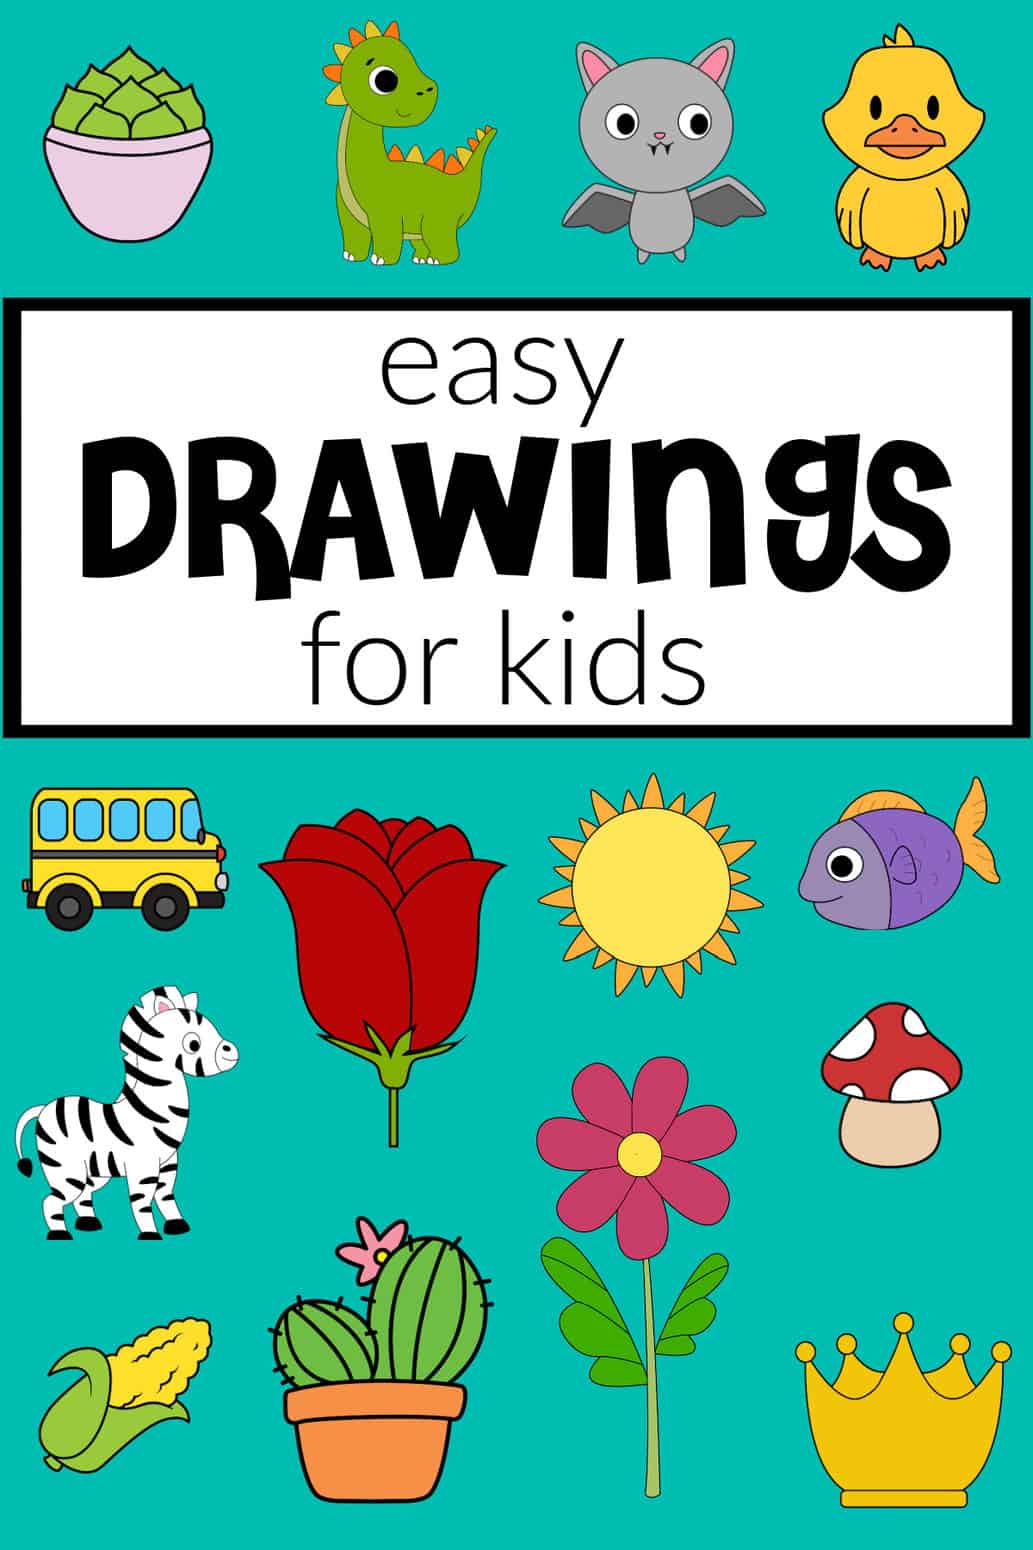 Learn How to Draw With Beginner-Friendly Guides - Design